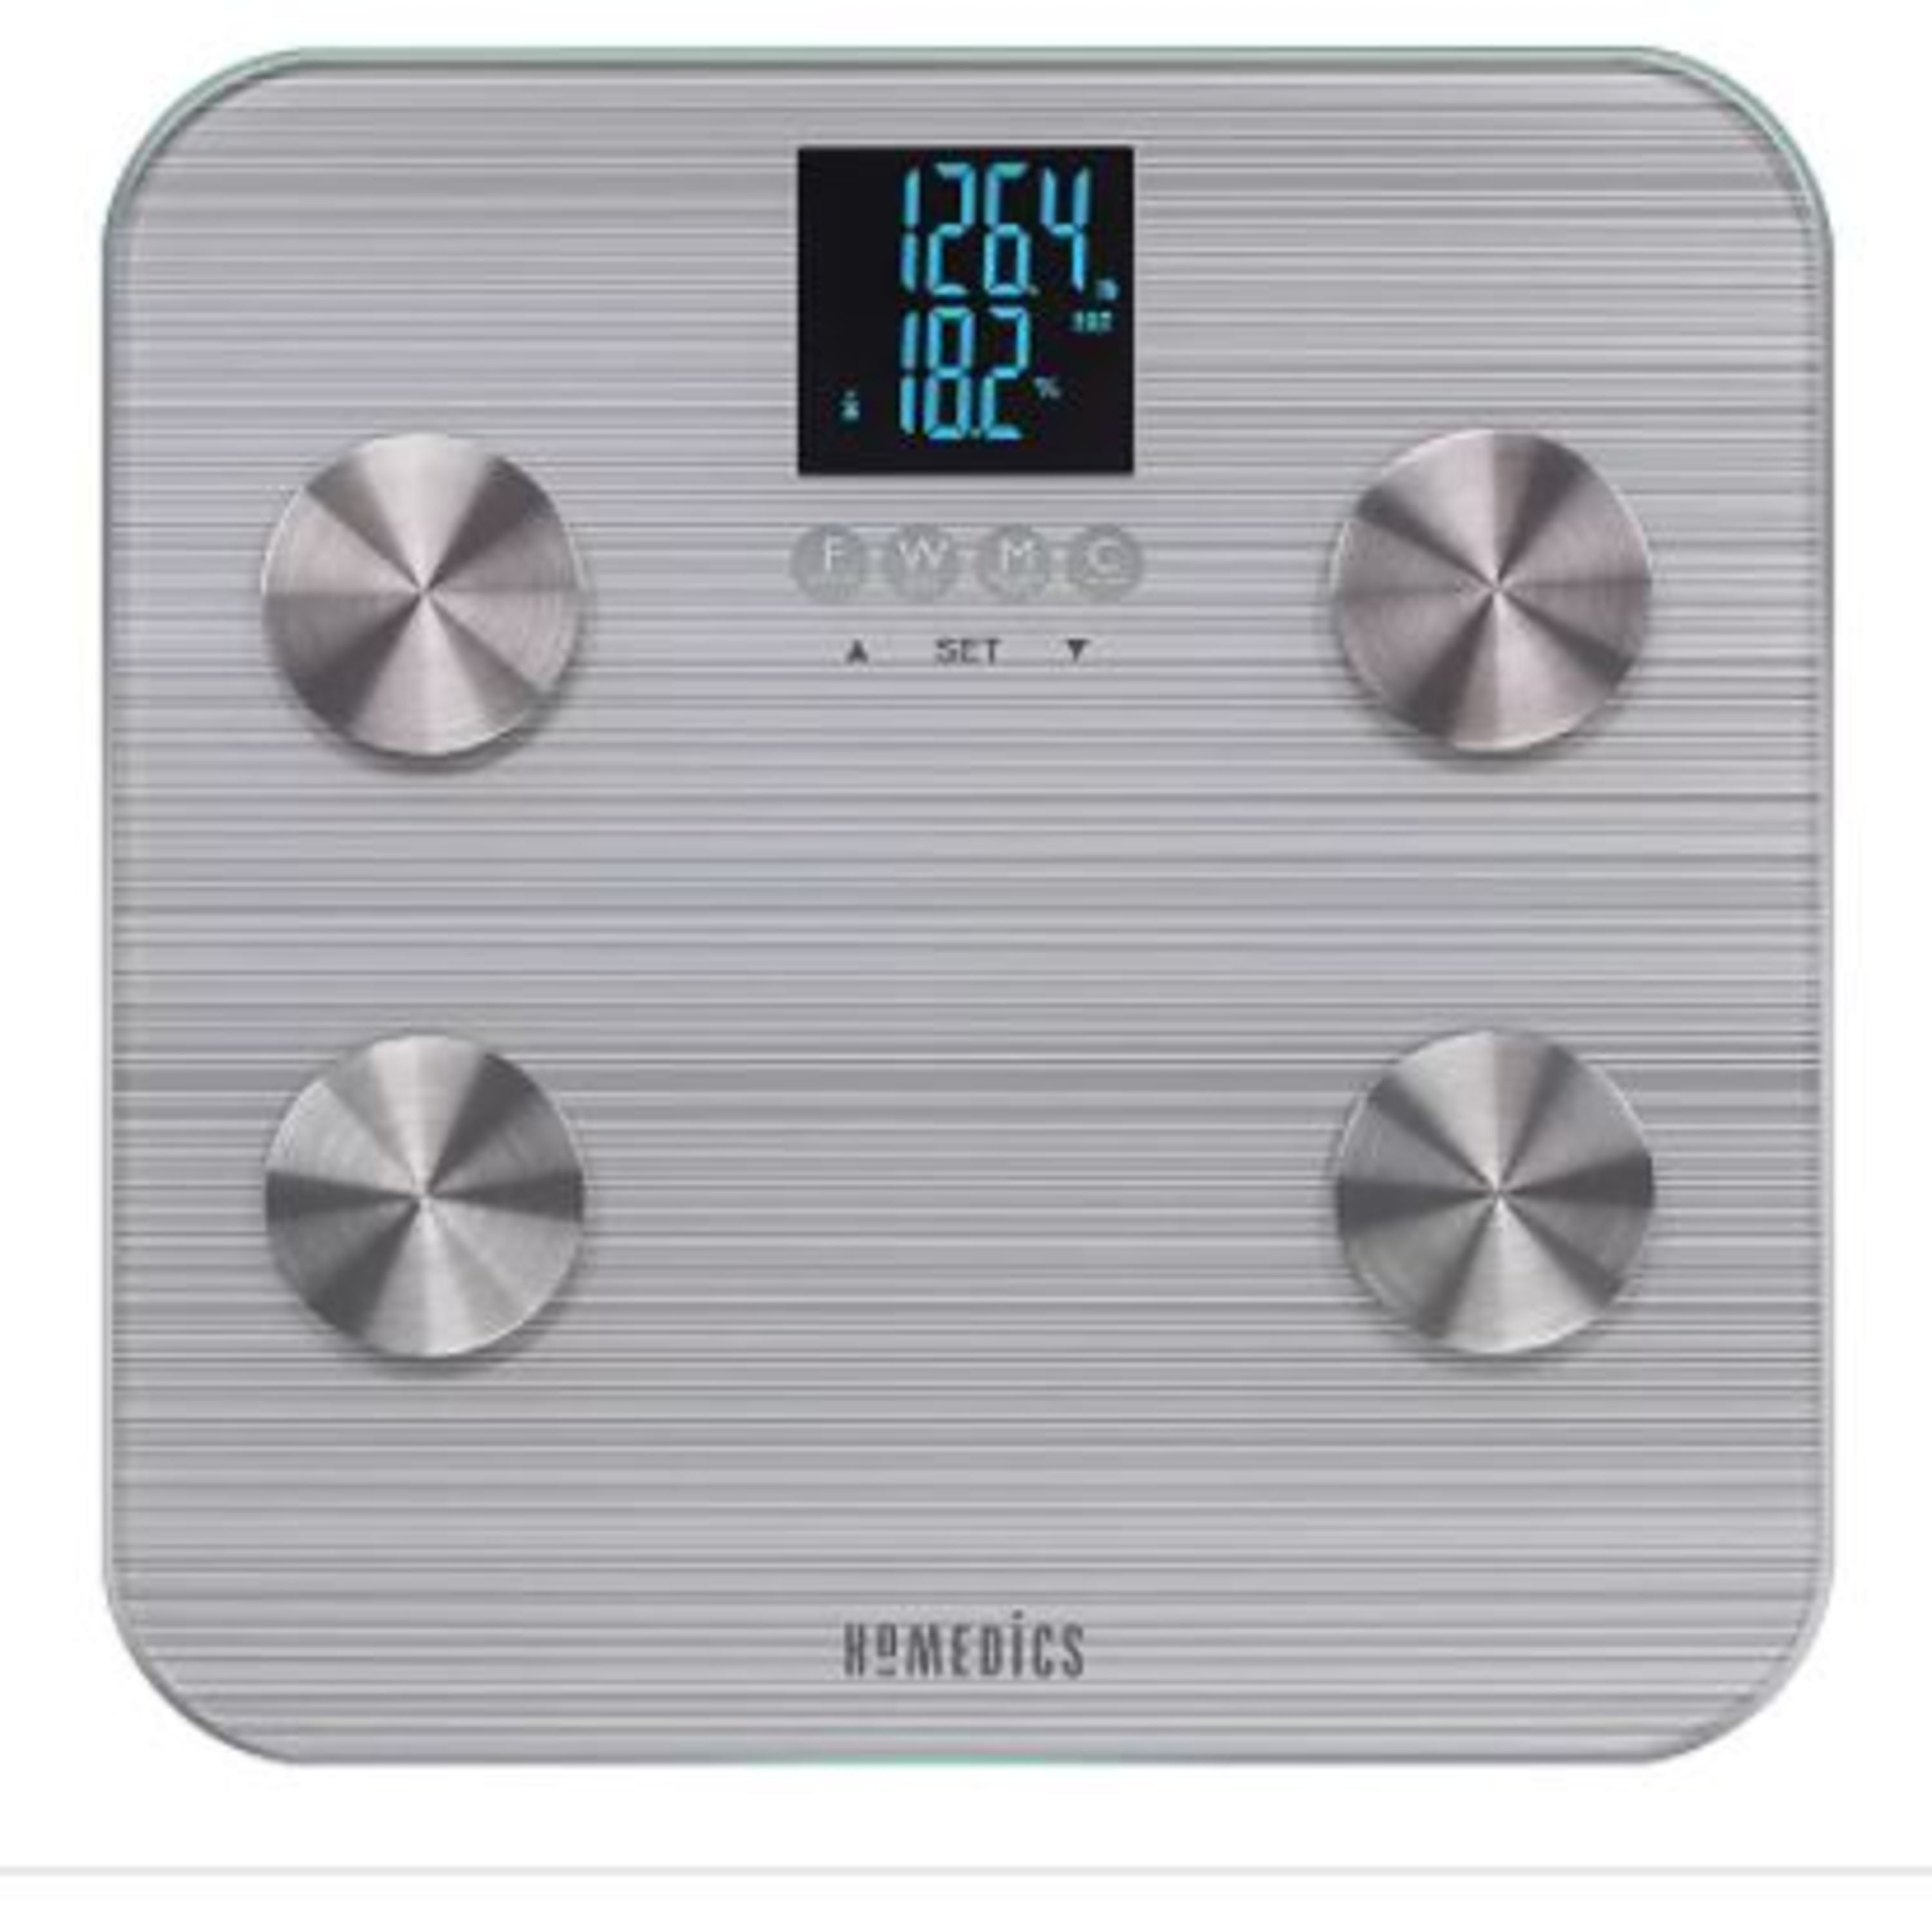 HoMedics Stainless Steel/Glass Digital Bathroom Scale Retail At $35 for  Sale in Clifton, NJ - OfferUp